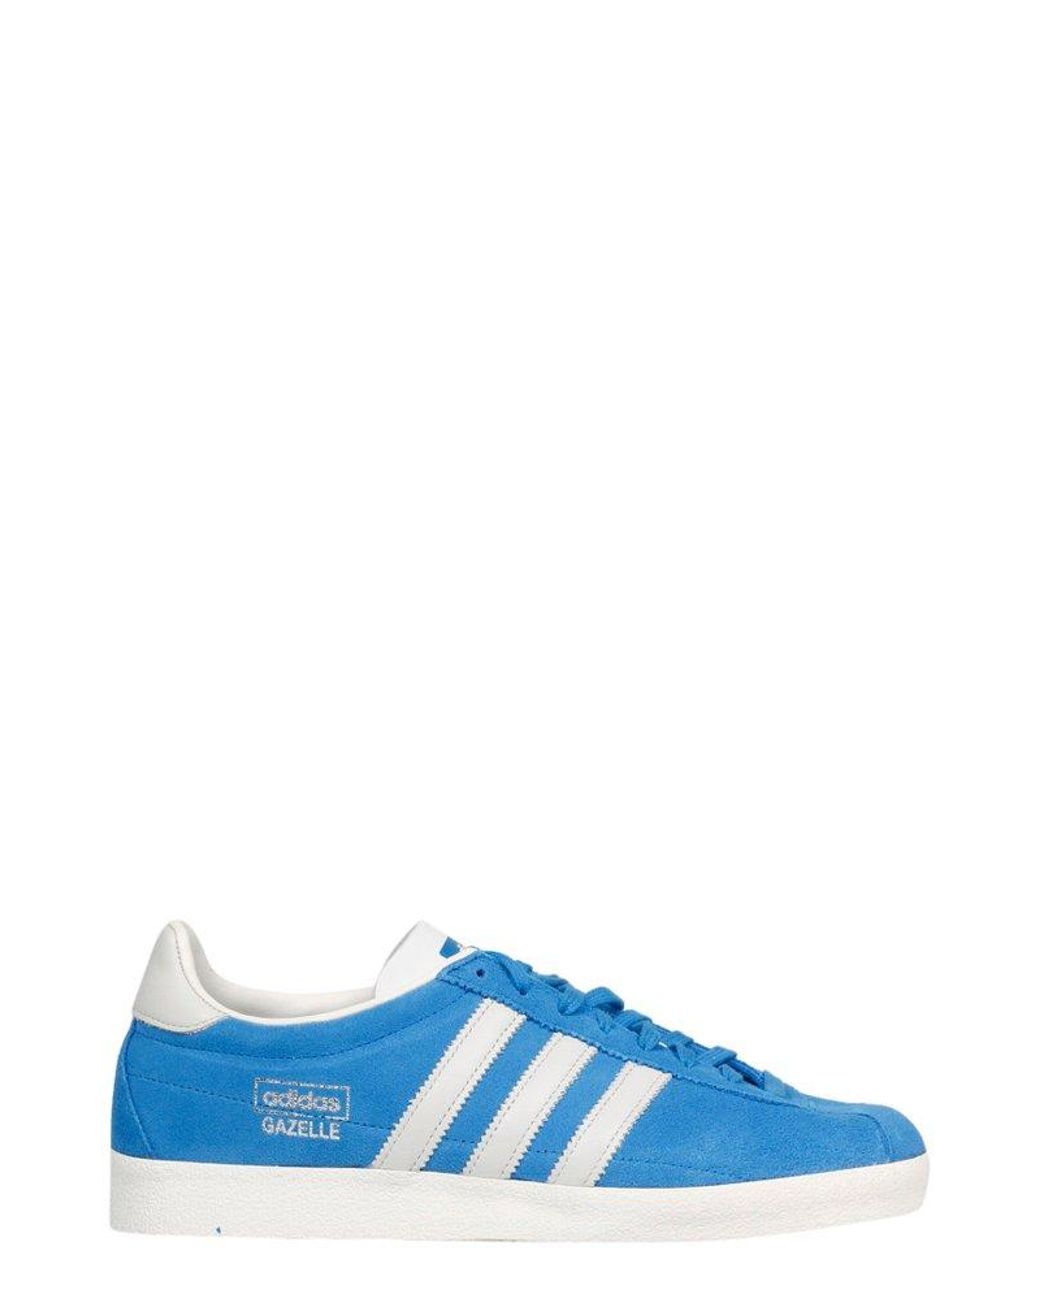 adidas Gazelle Low-top Sneakers in Blue for Men Mens Shoes Trainers Low-top trainers 